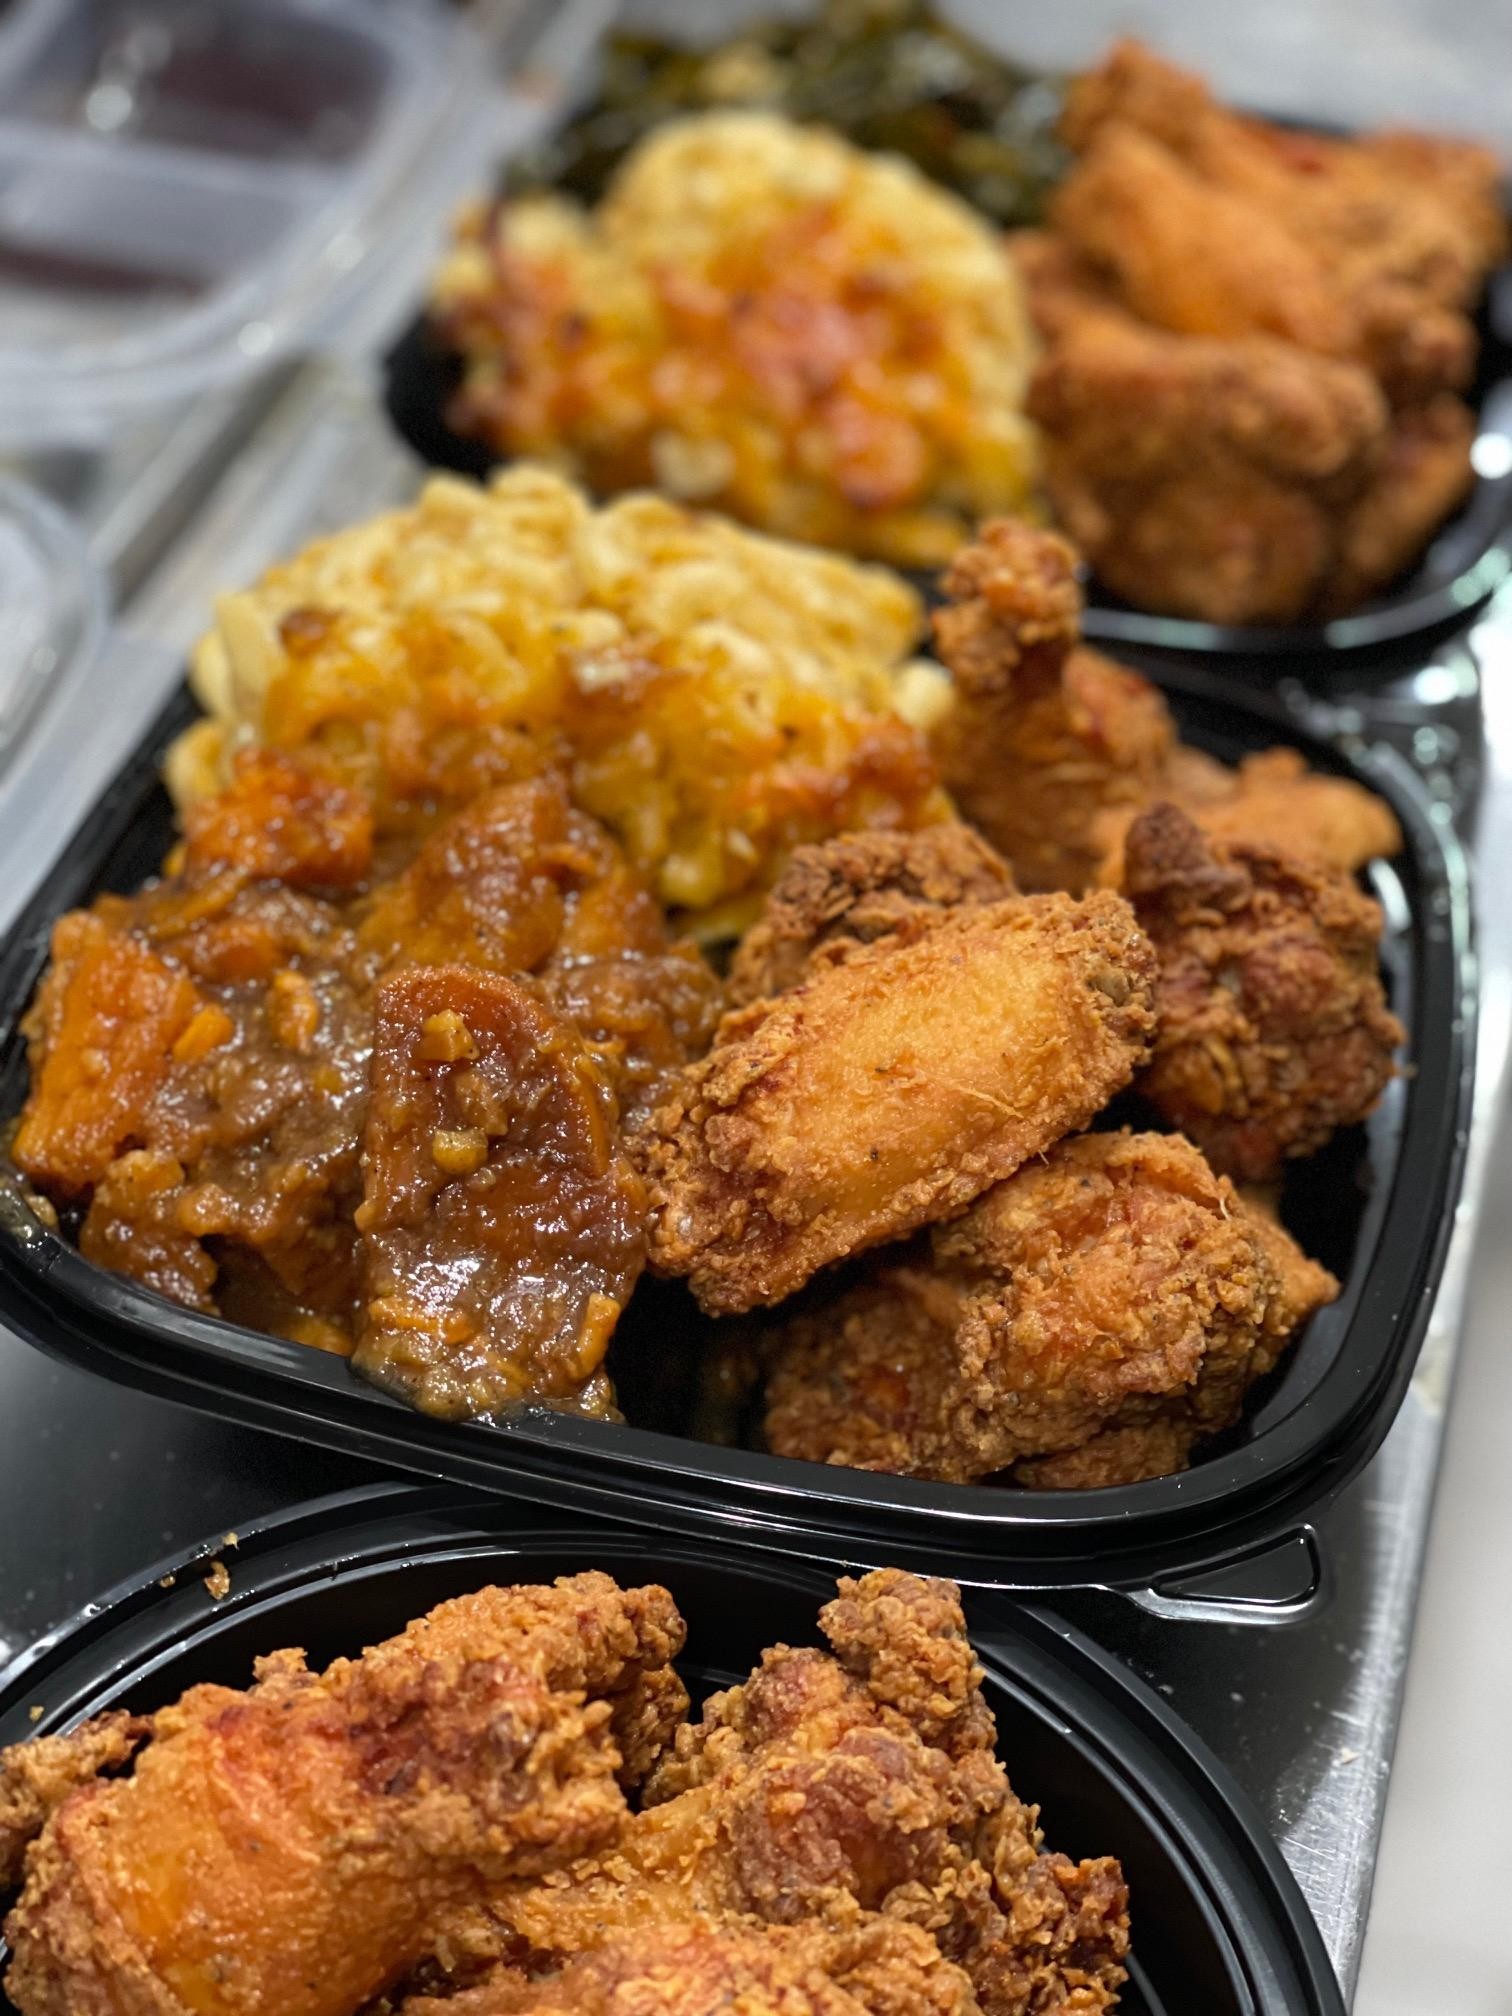 Large Fried Chicken Wingettes